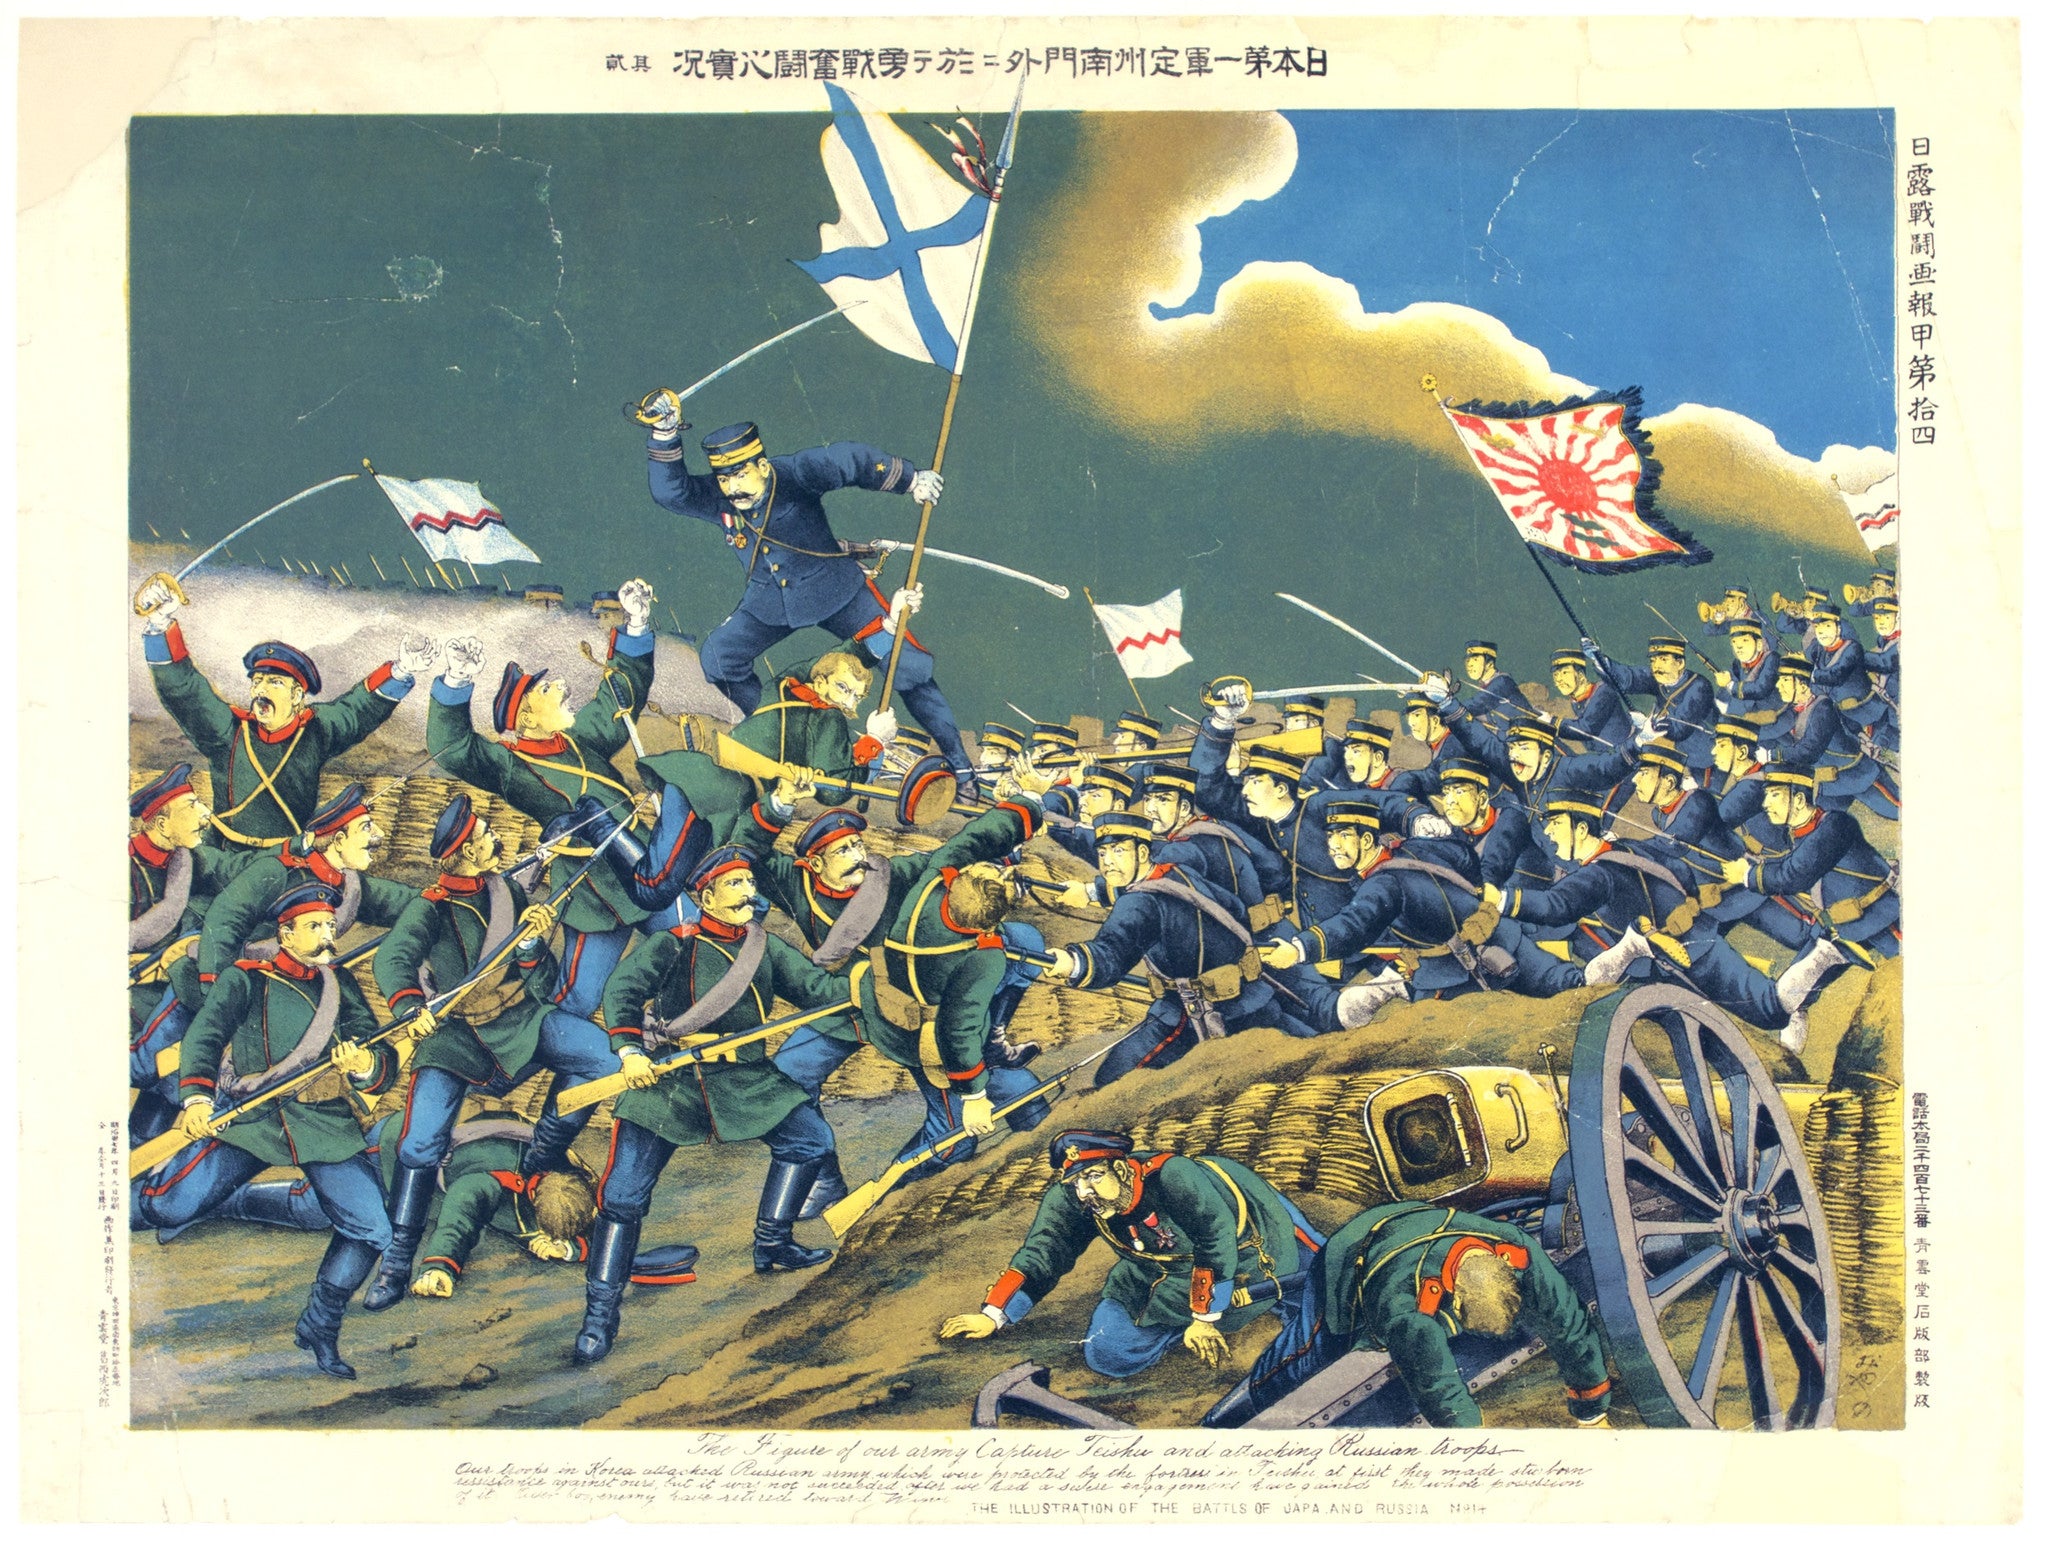 Russian and Japanese Troops at War – Poster Museum